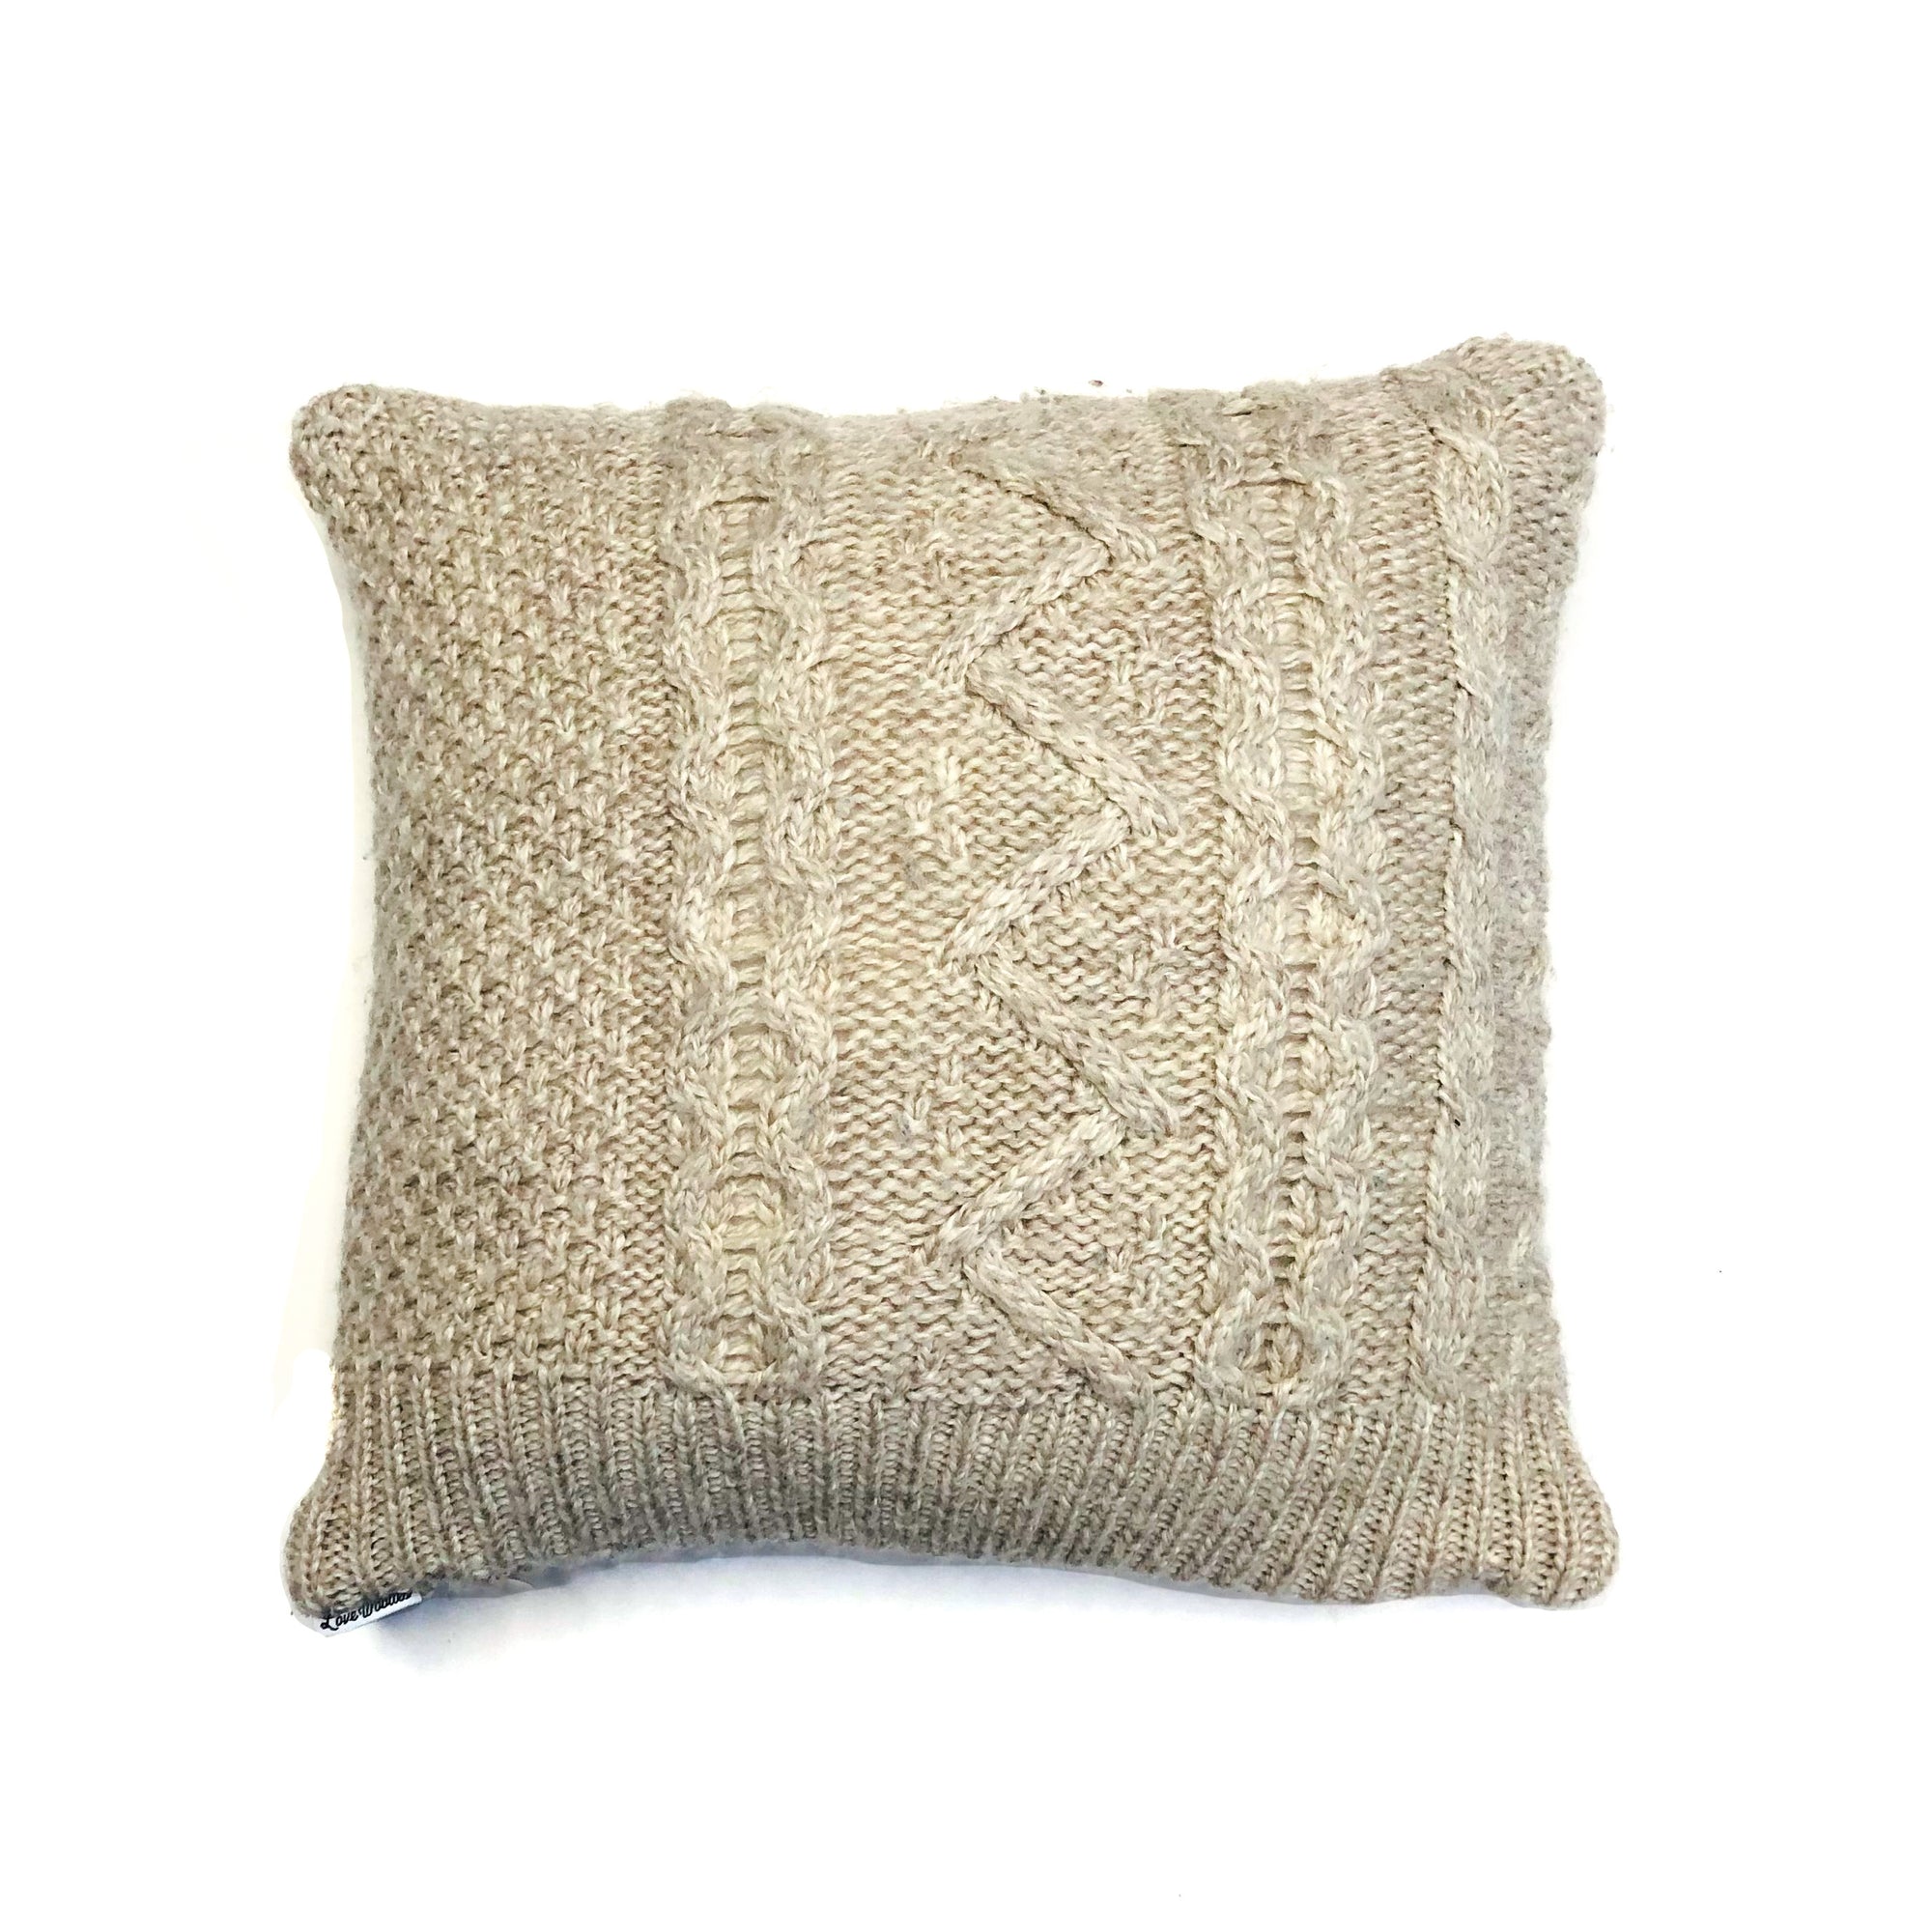 12 x 12 Light Oatmeal Cable Knit Pillow Cover